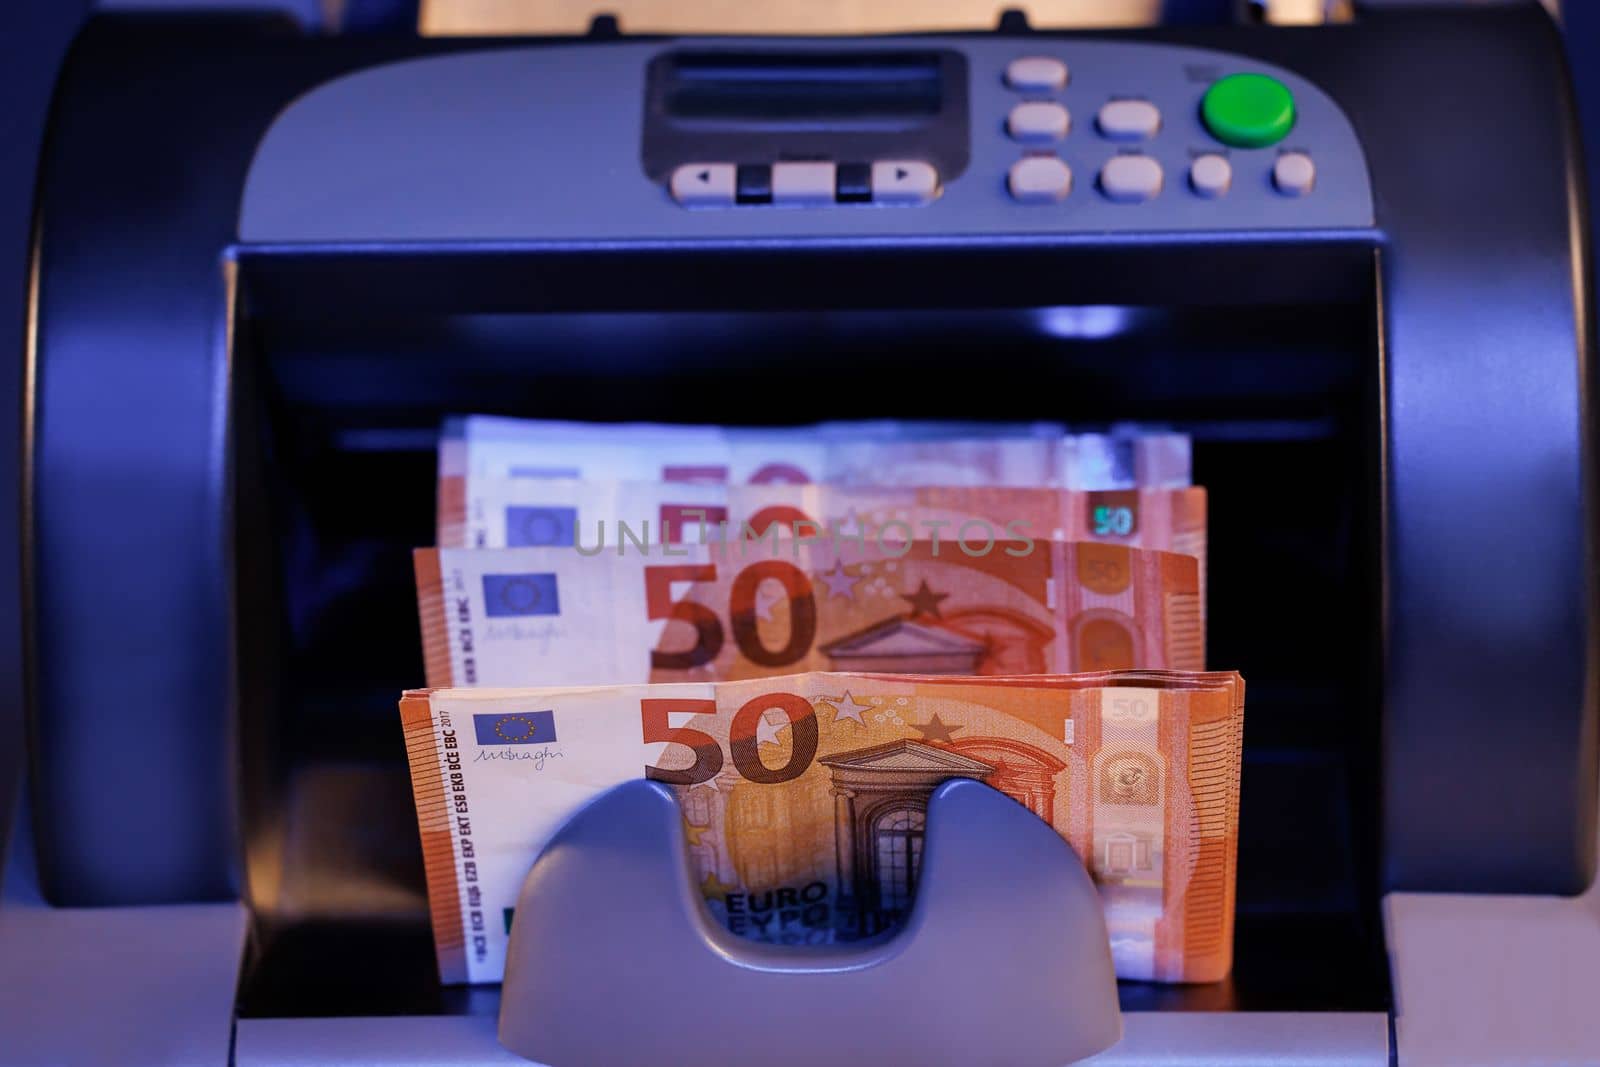 Counting mechanism is processing euros. 50 euro banknotes counting in the machine. Euro currency on counting machine.